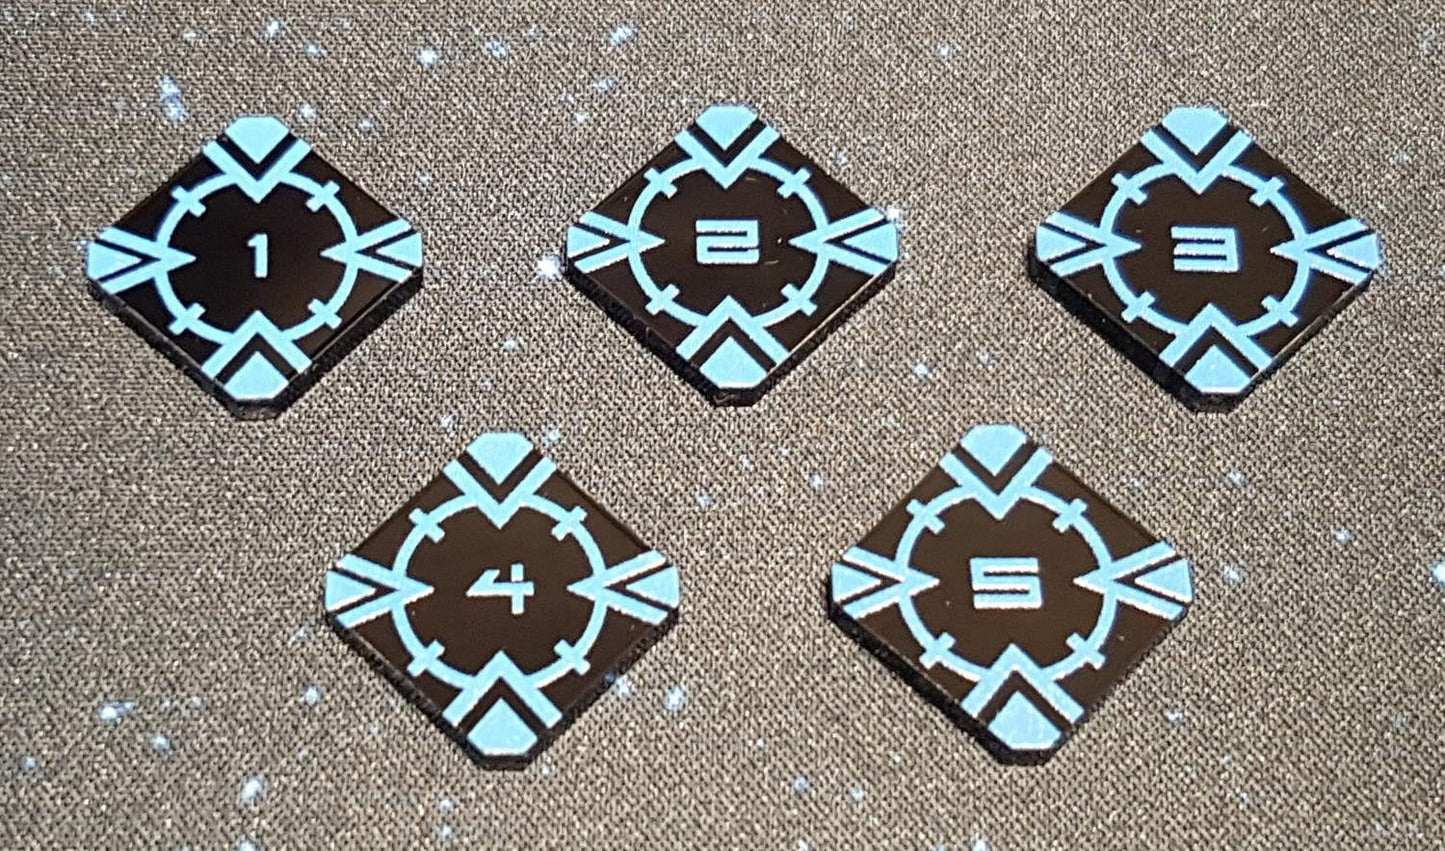 V2 Acrylic Colour Printed Target Lock Tokens 1 - 5 (Blue) for Star Wars X-Wing